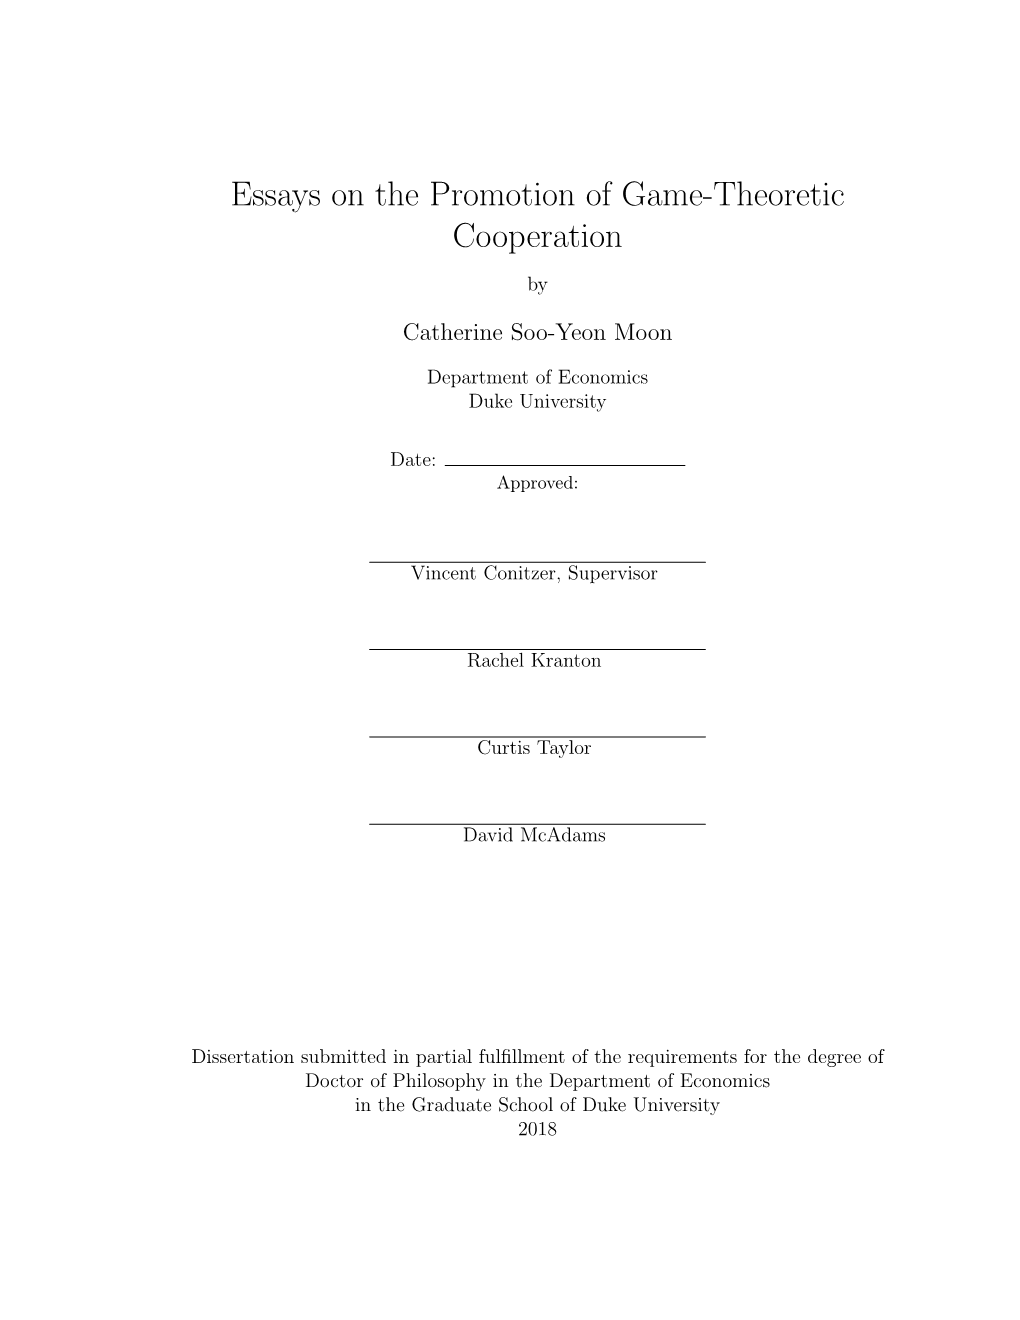 Essays on the Promotion of Game-Theoretic Cooperation